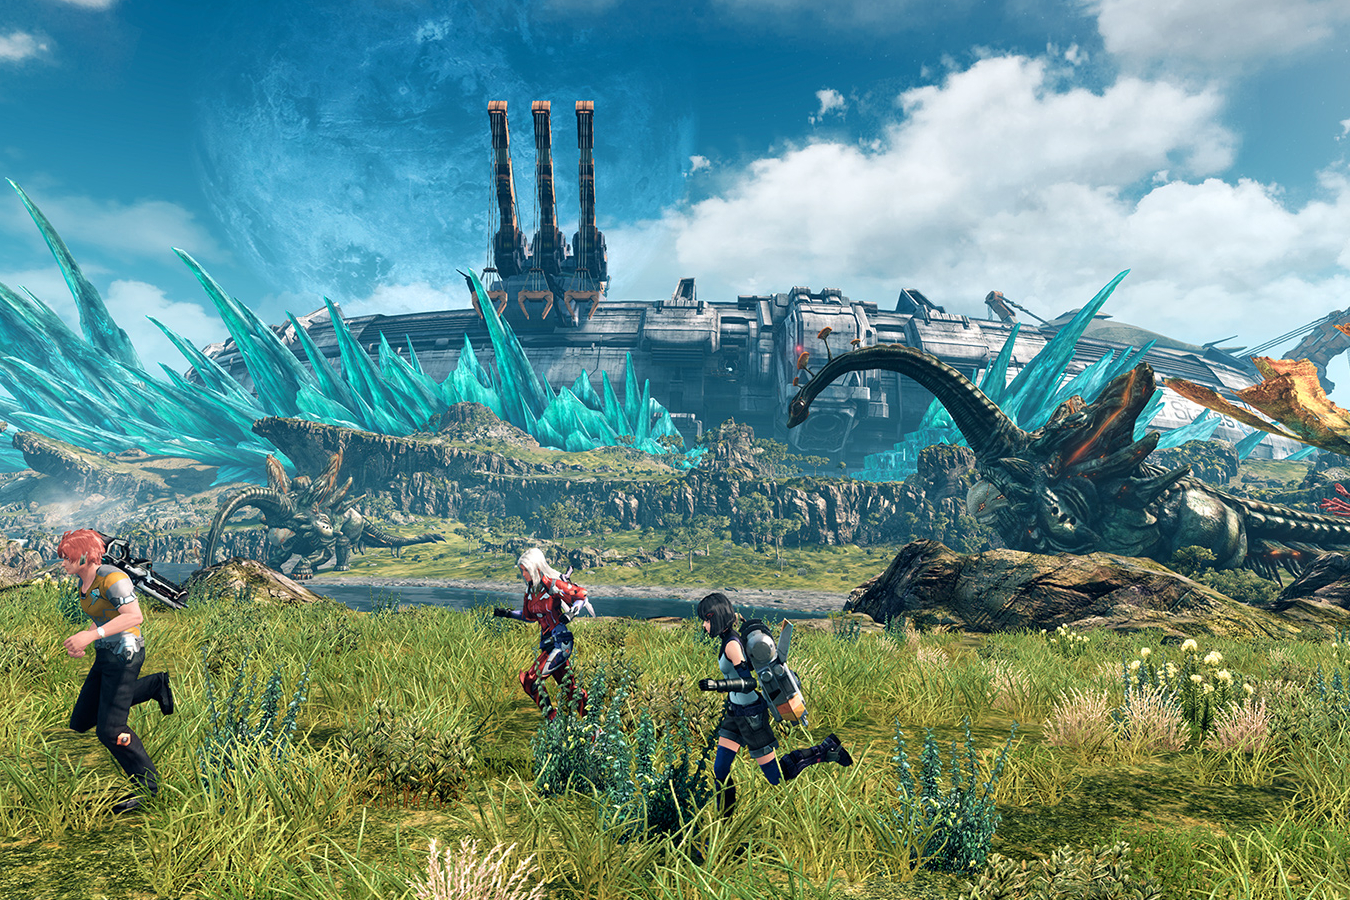 Review: Xenoblade Chronicles 3D (Nintendo 3DS) – Digitally Downloaded